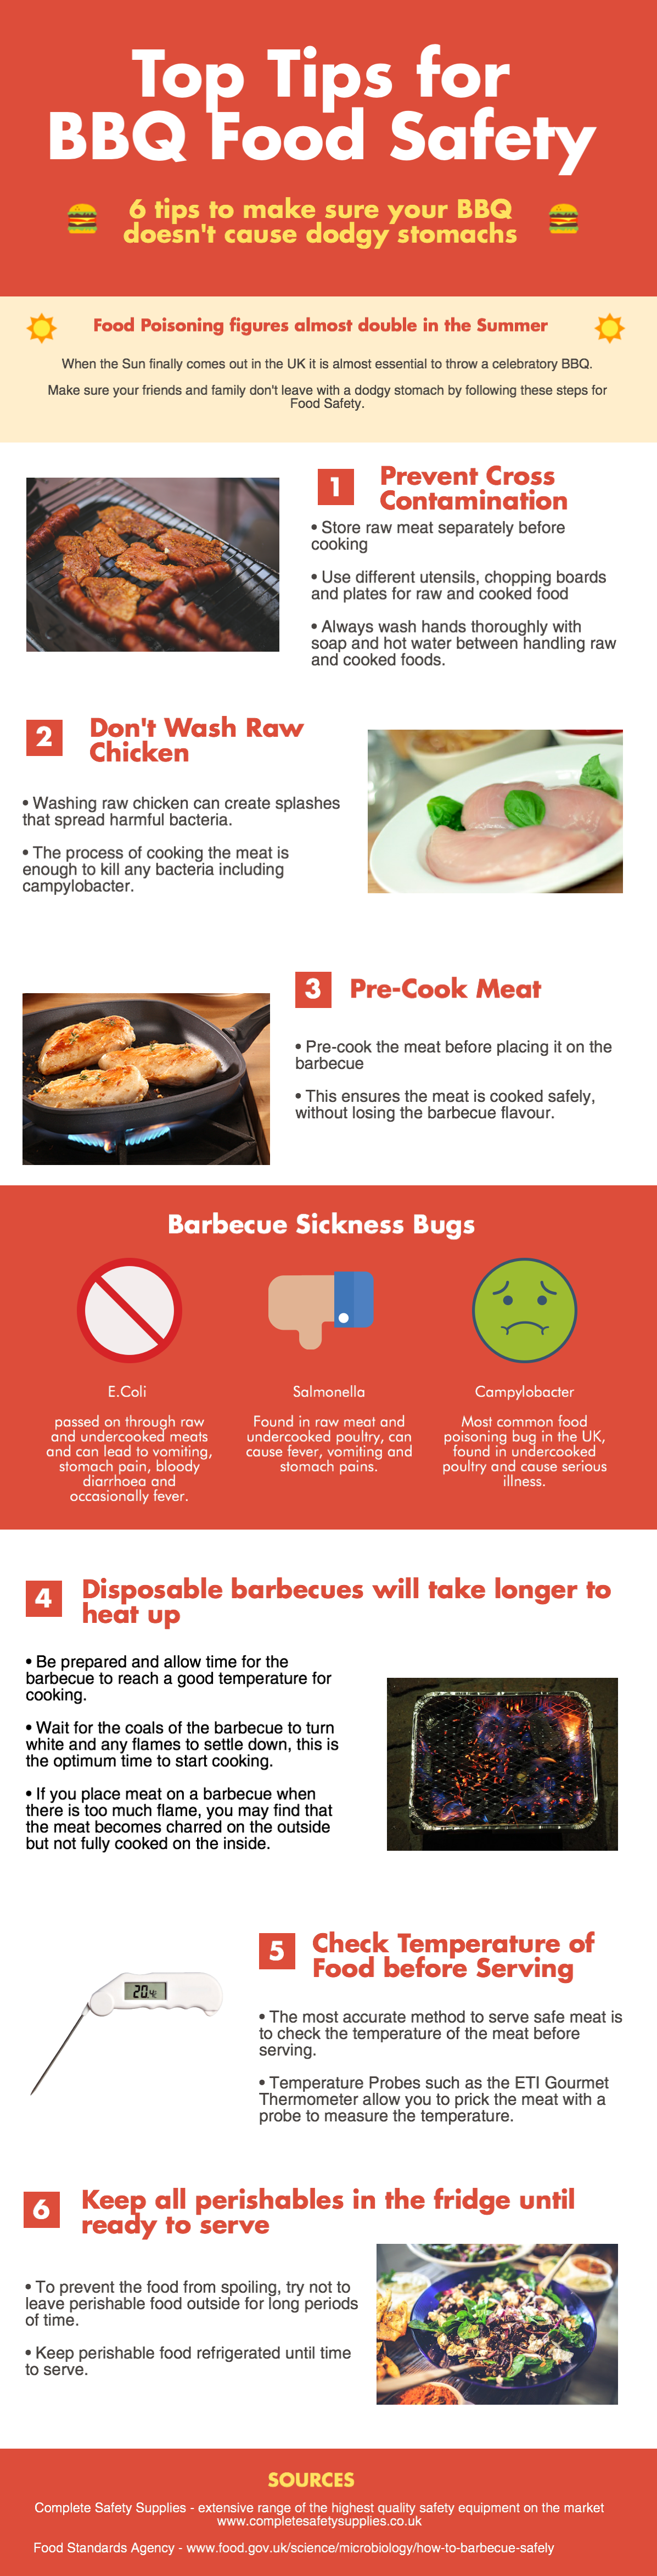 Top Tips for BBQ Safety